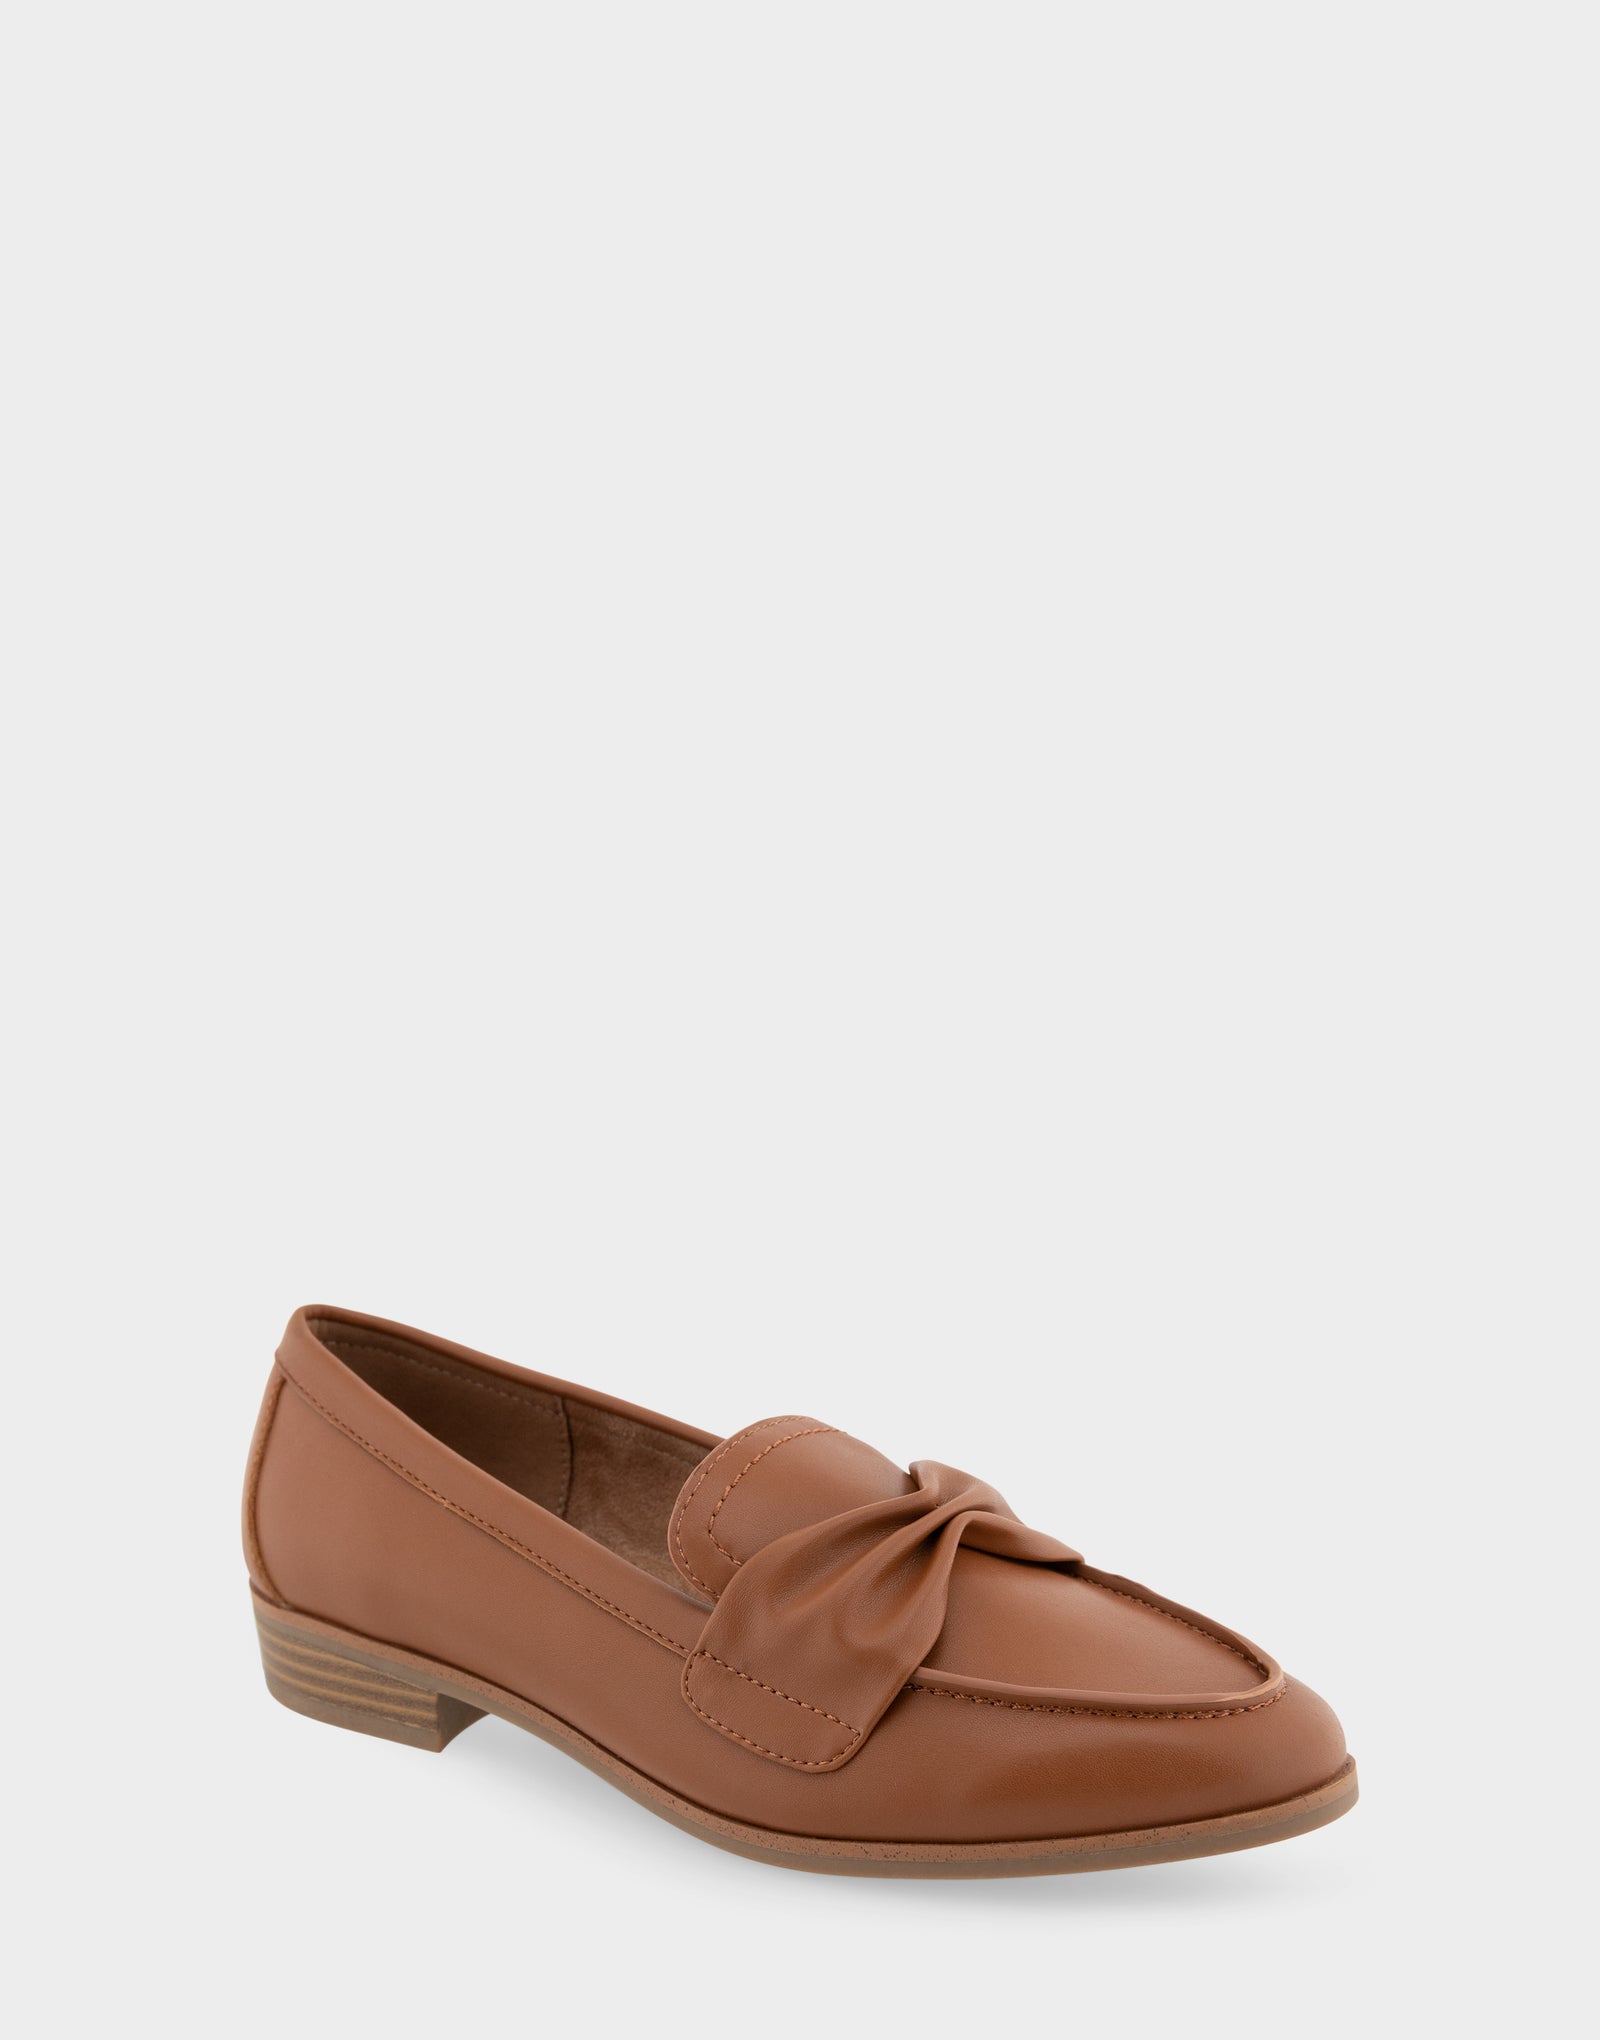 Women's Tailored Loafer in Dark Tan Faux Leather